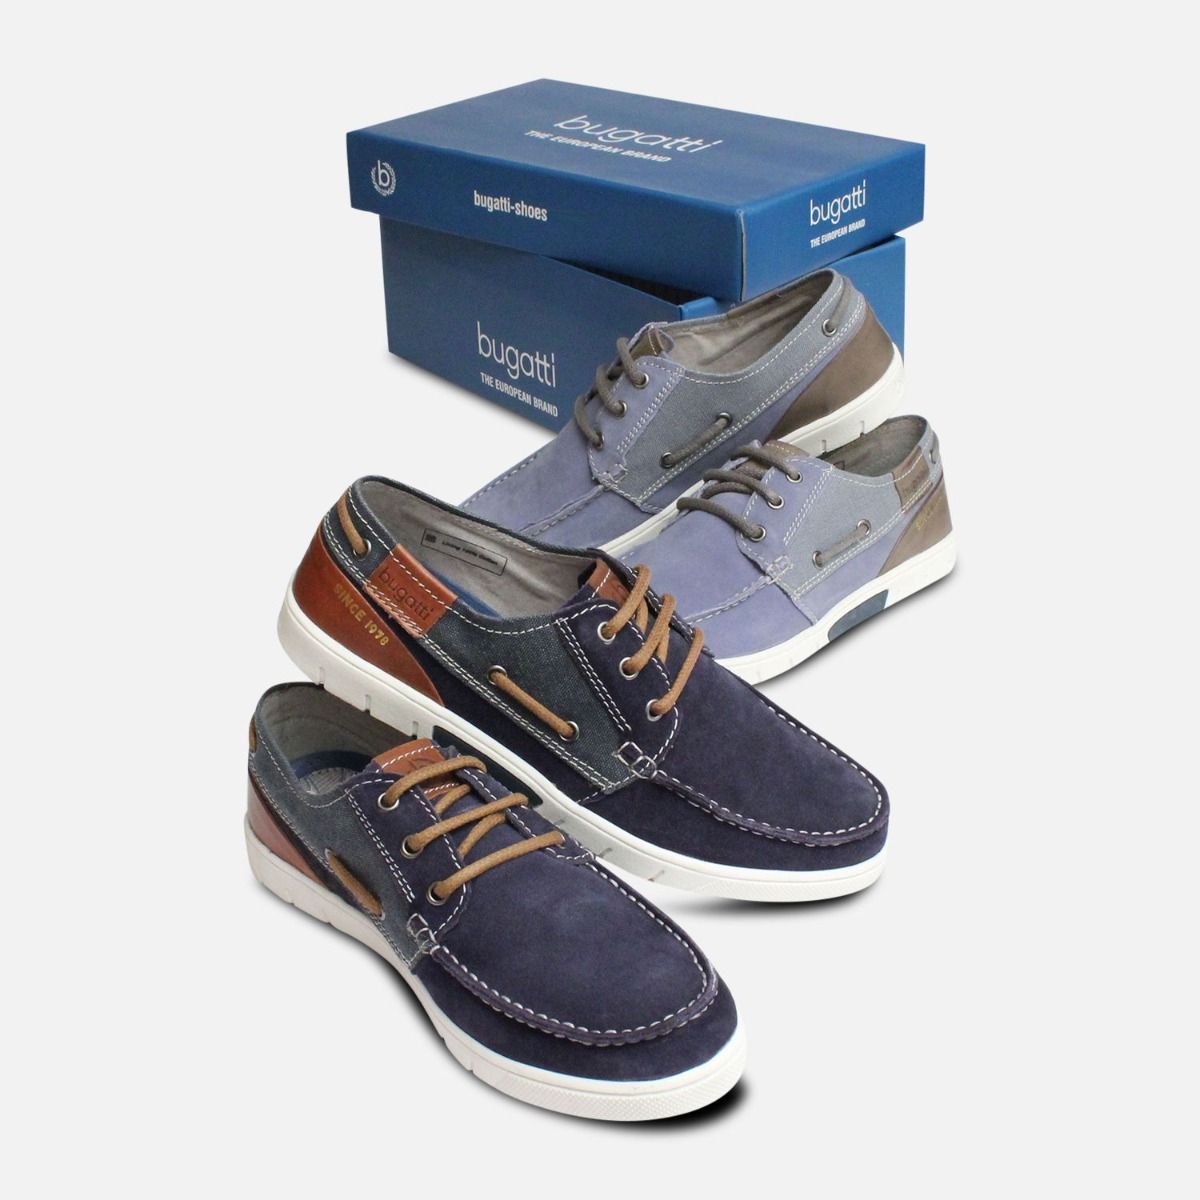 mens suede boat shoes